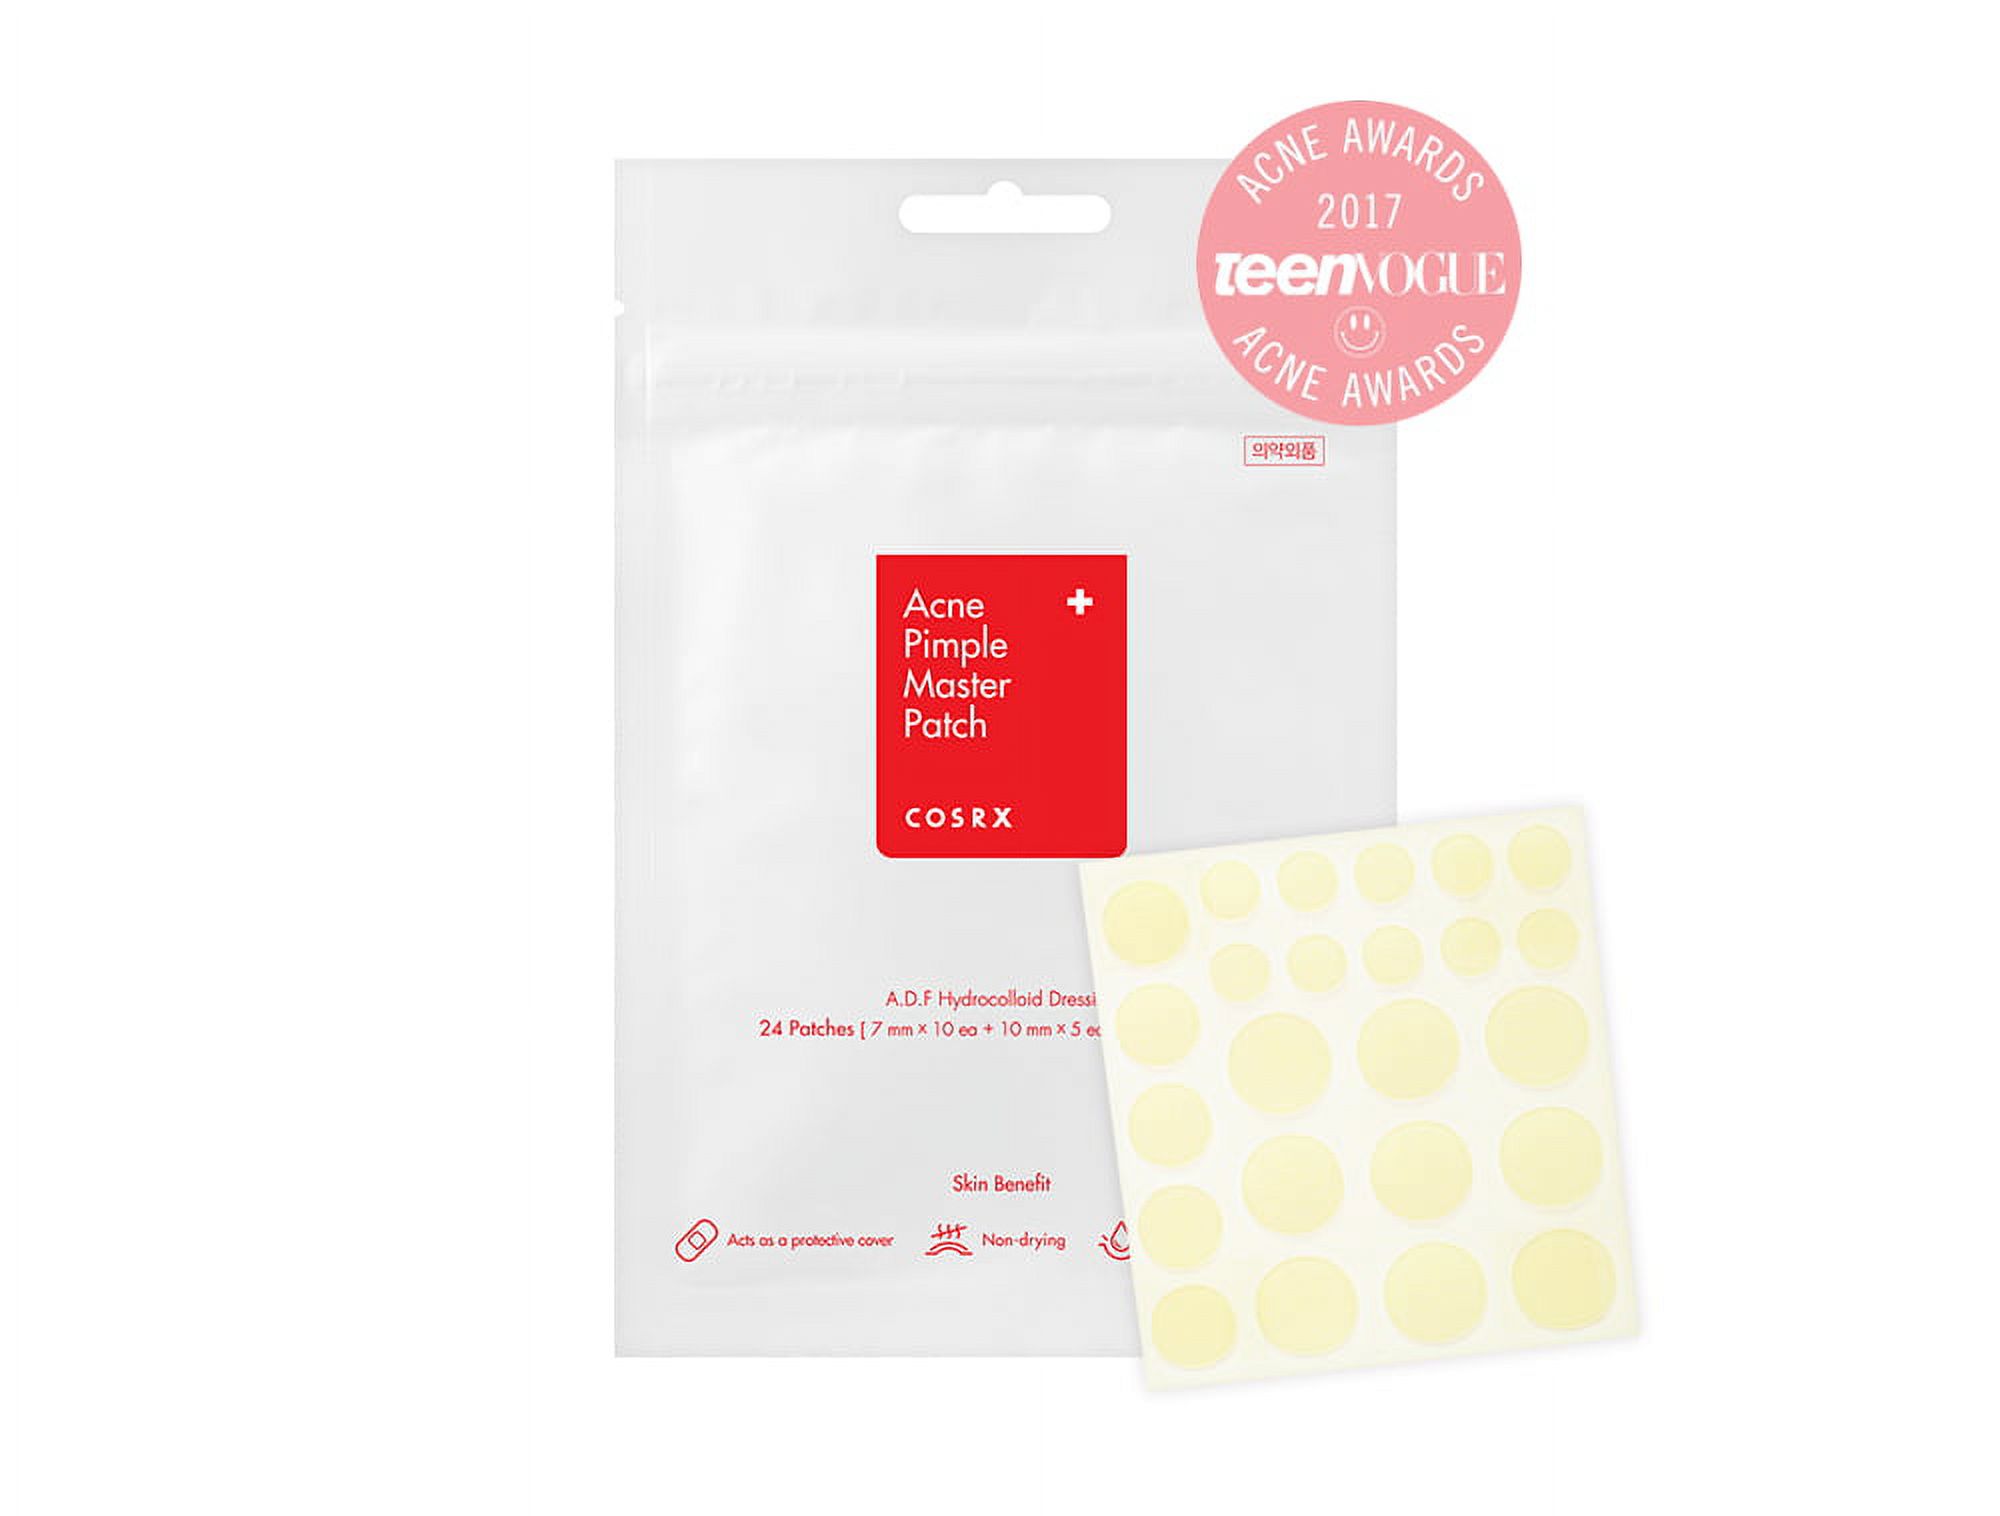 COSRX Acne Pimple Master Patch, 24 Ct - image 3 of 4